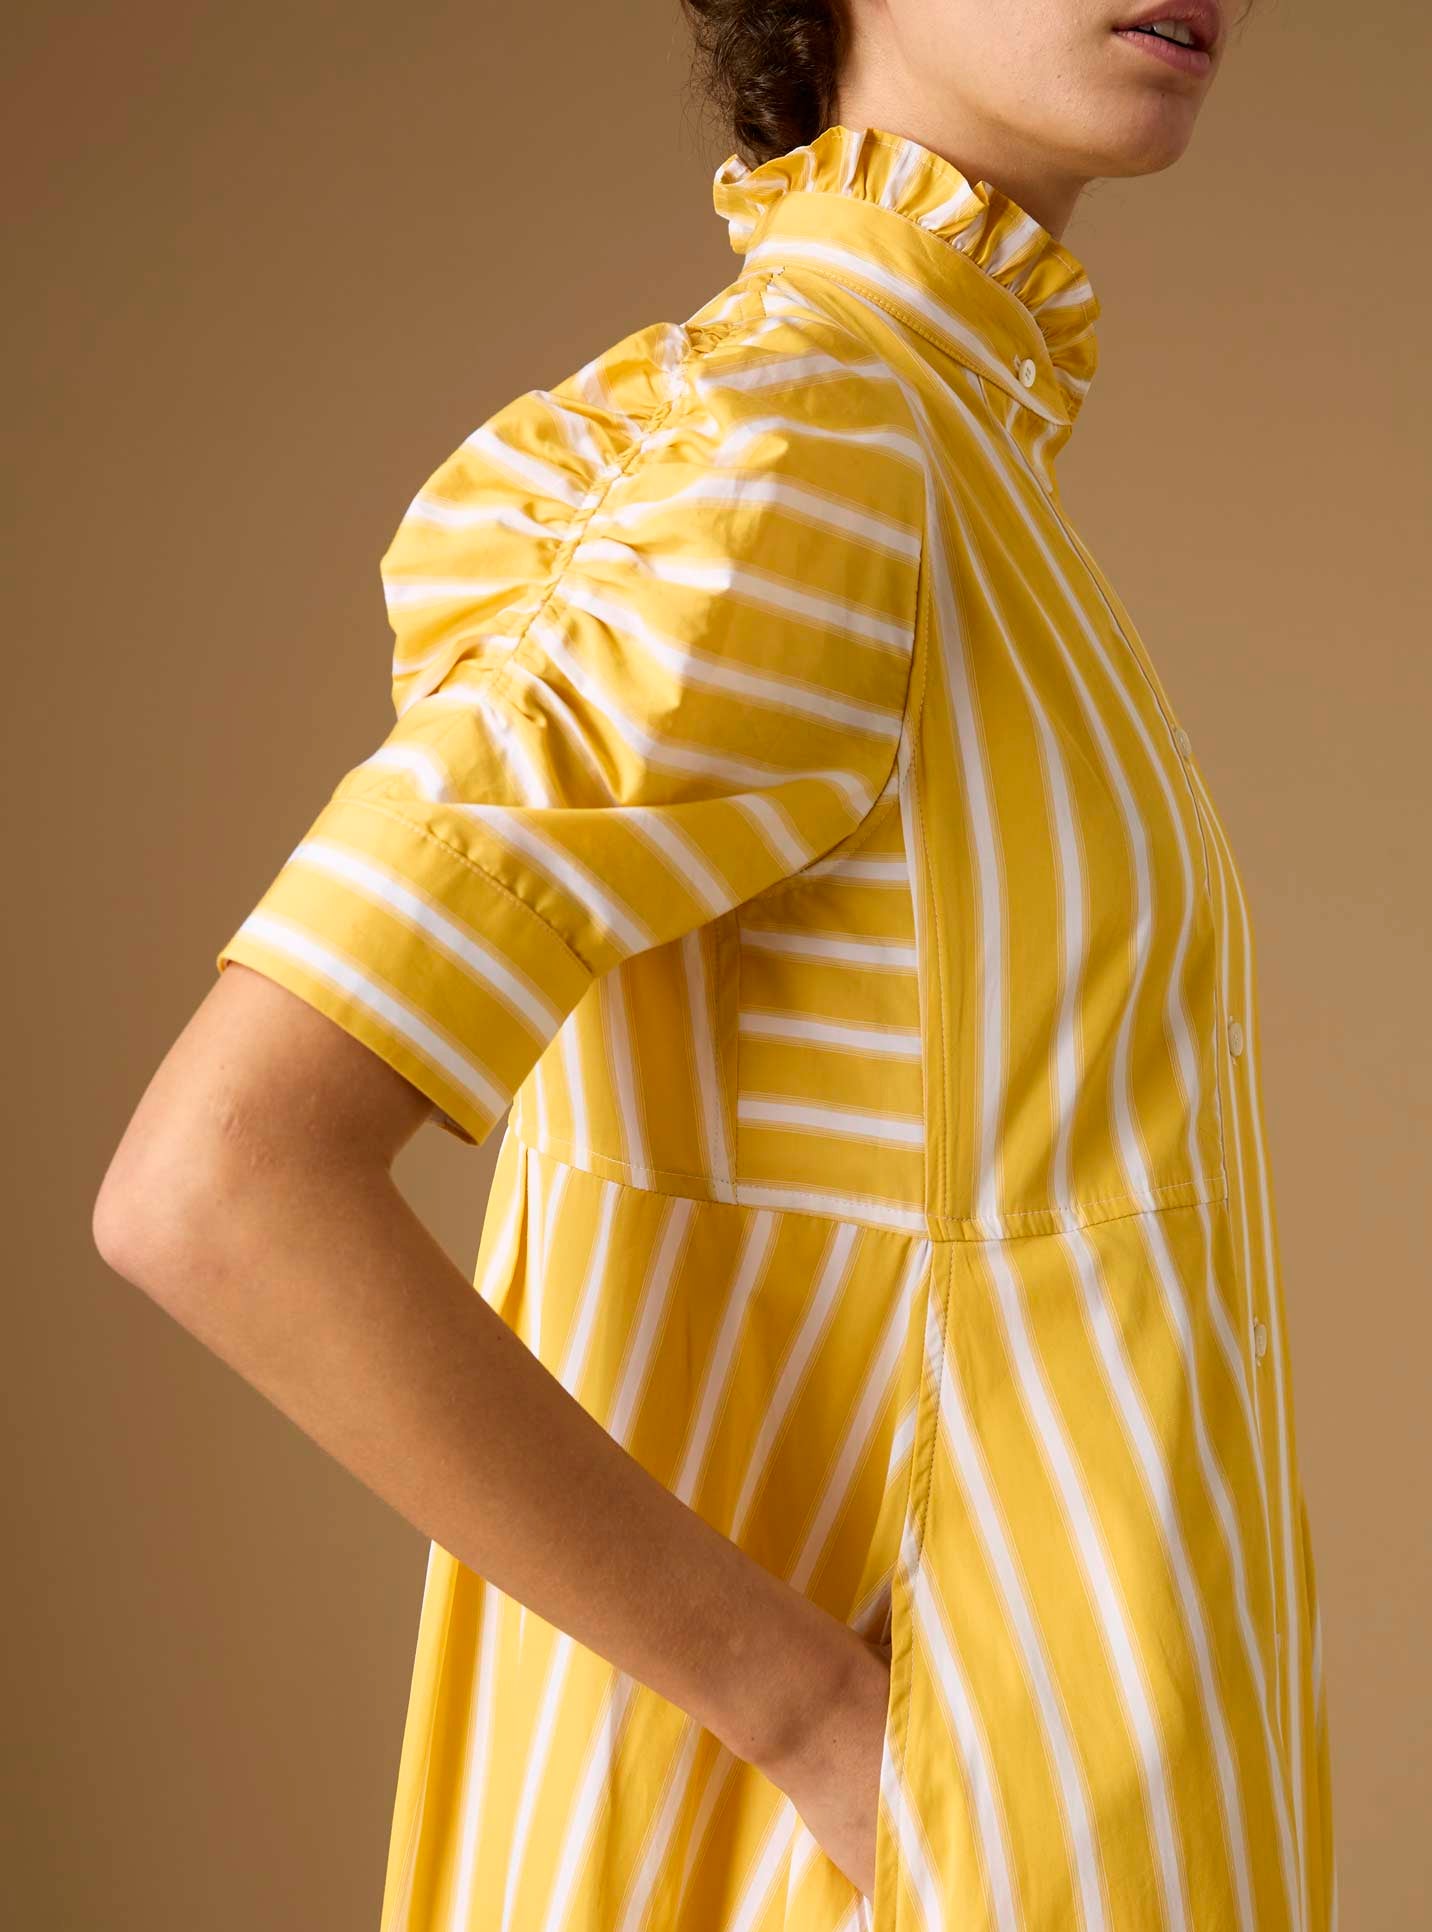 Sleeve detail of Venetia Downing Poplin Yellow Dress by Thierry Colson